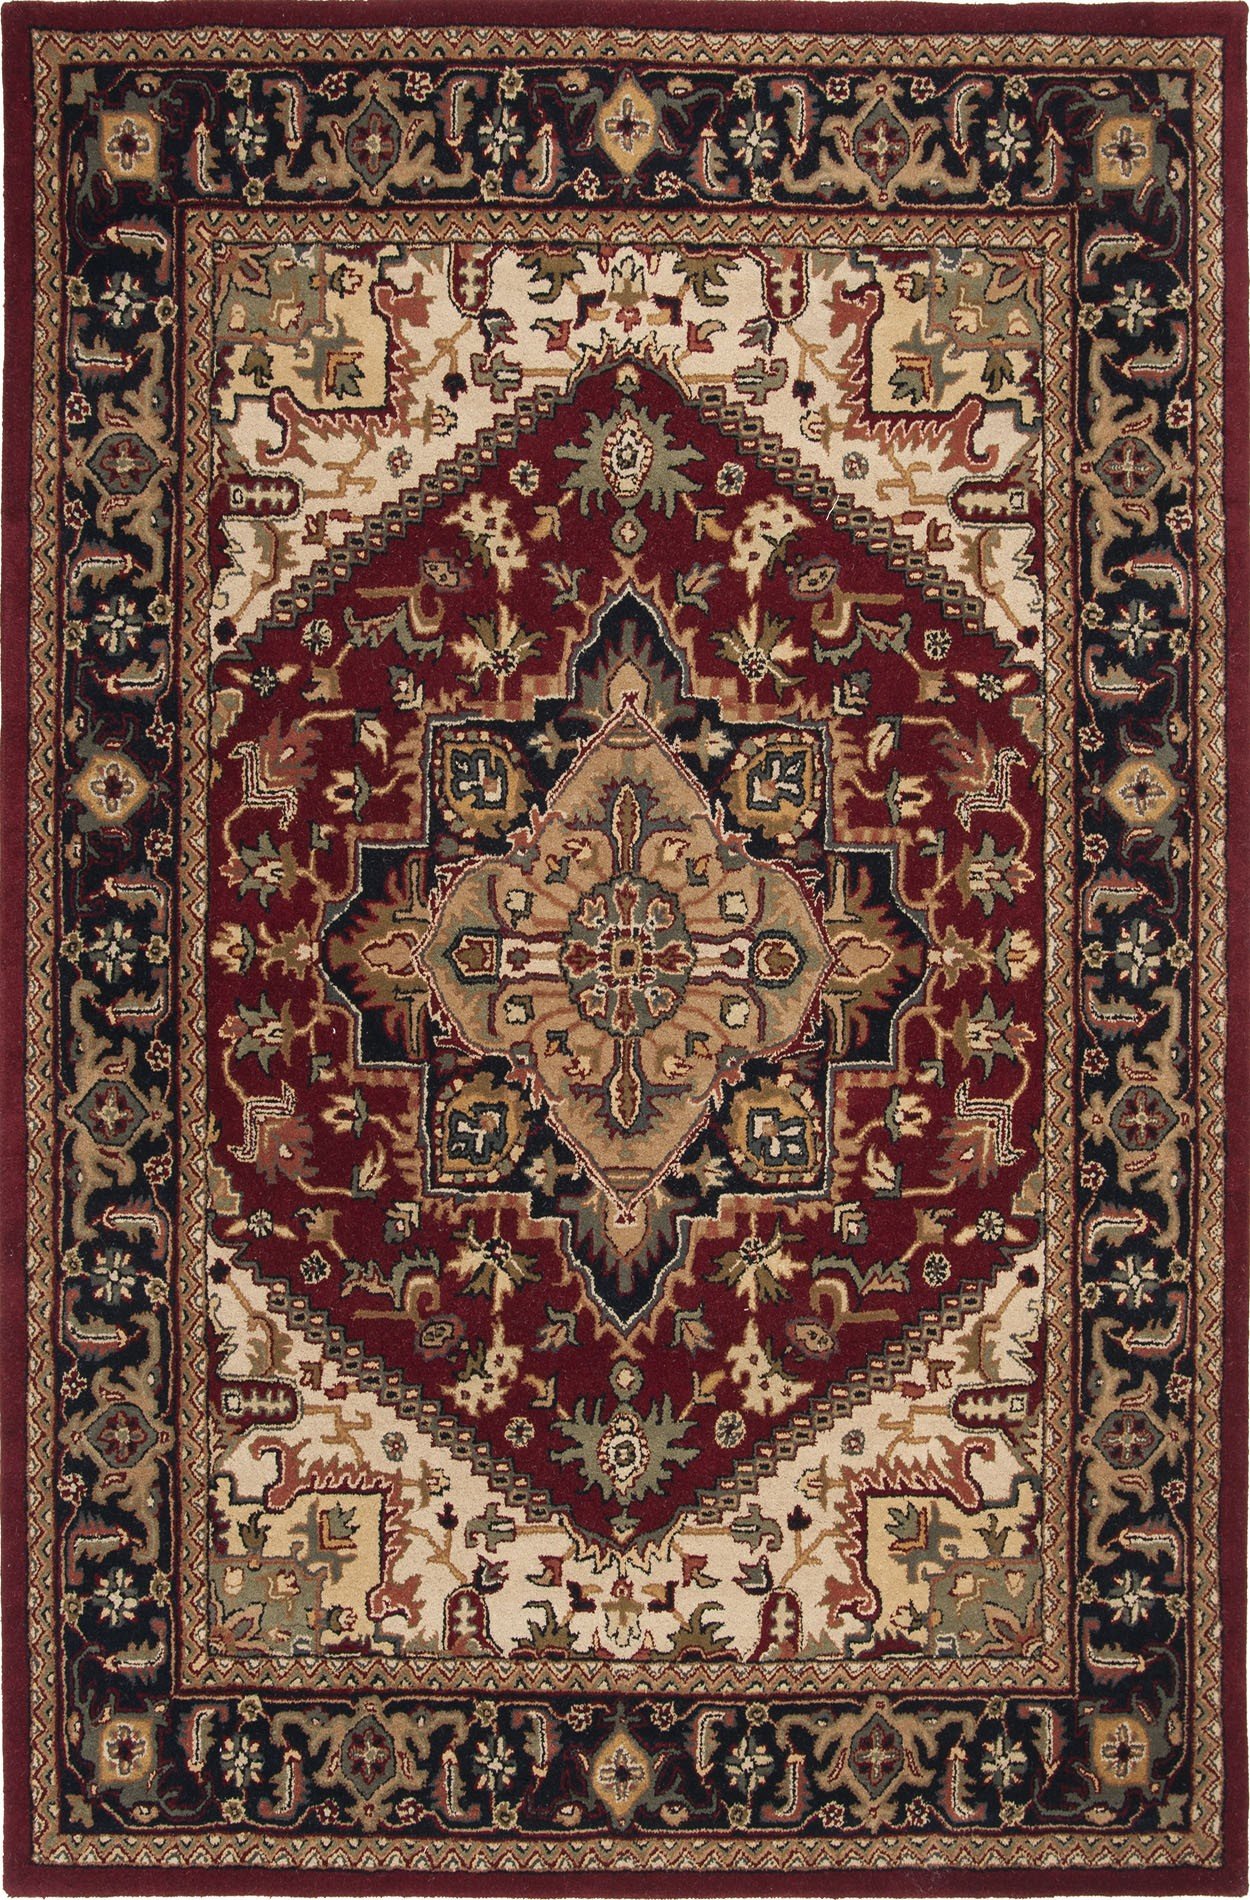 Oriental Area Rugs Carpets For